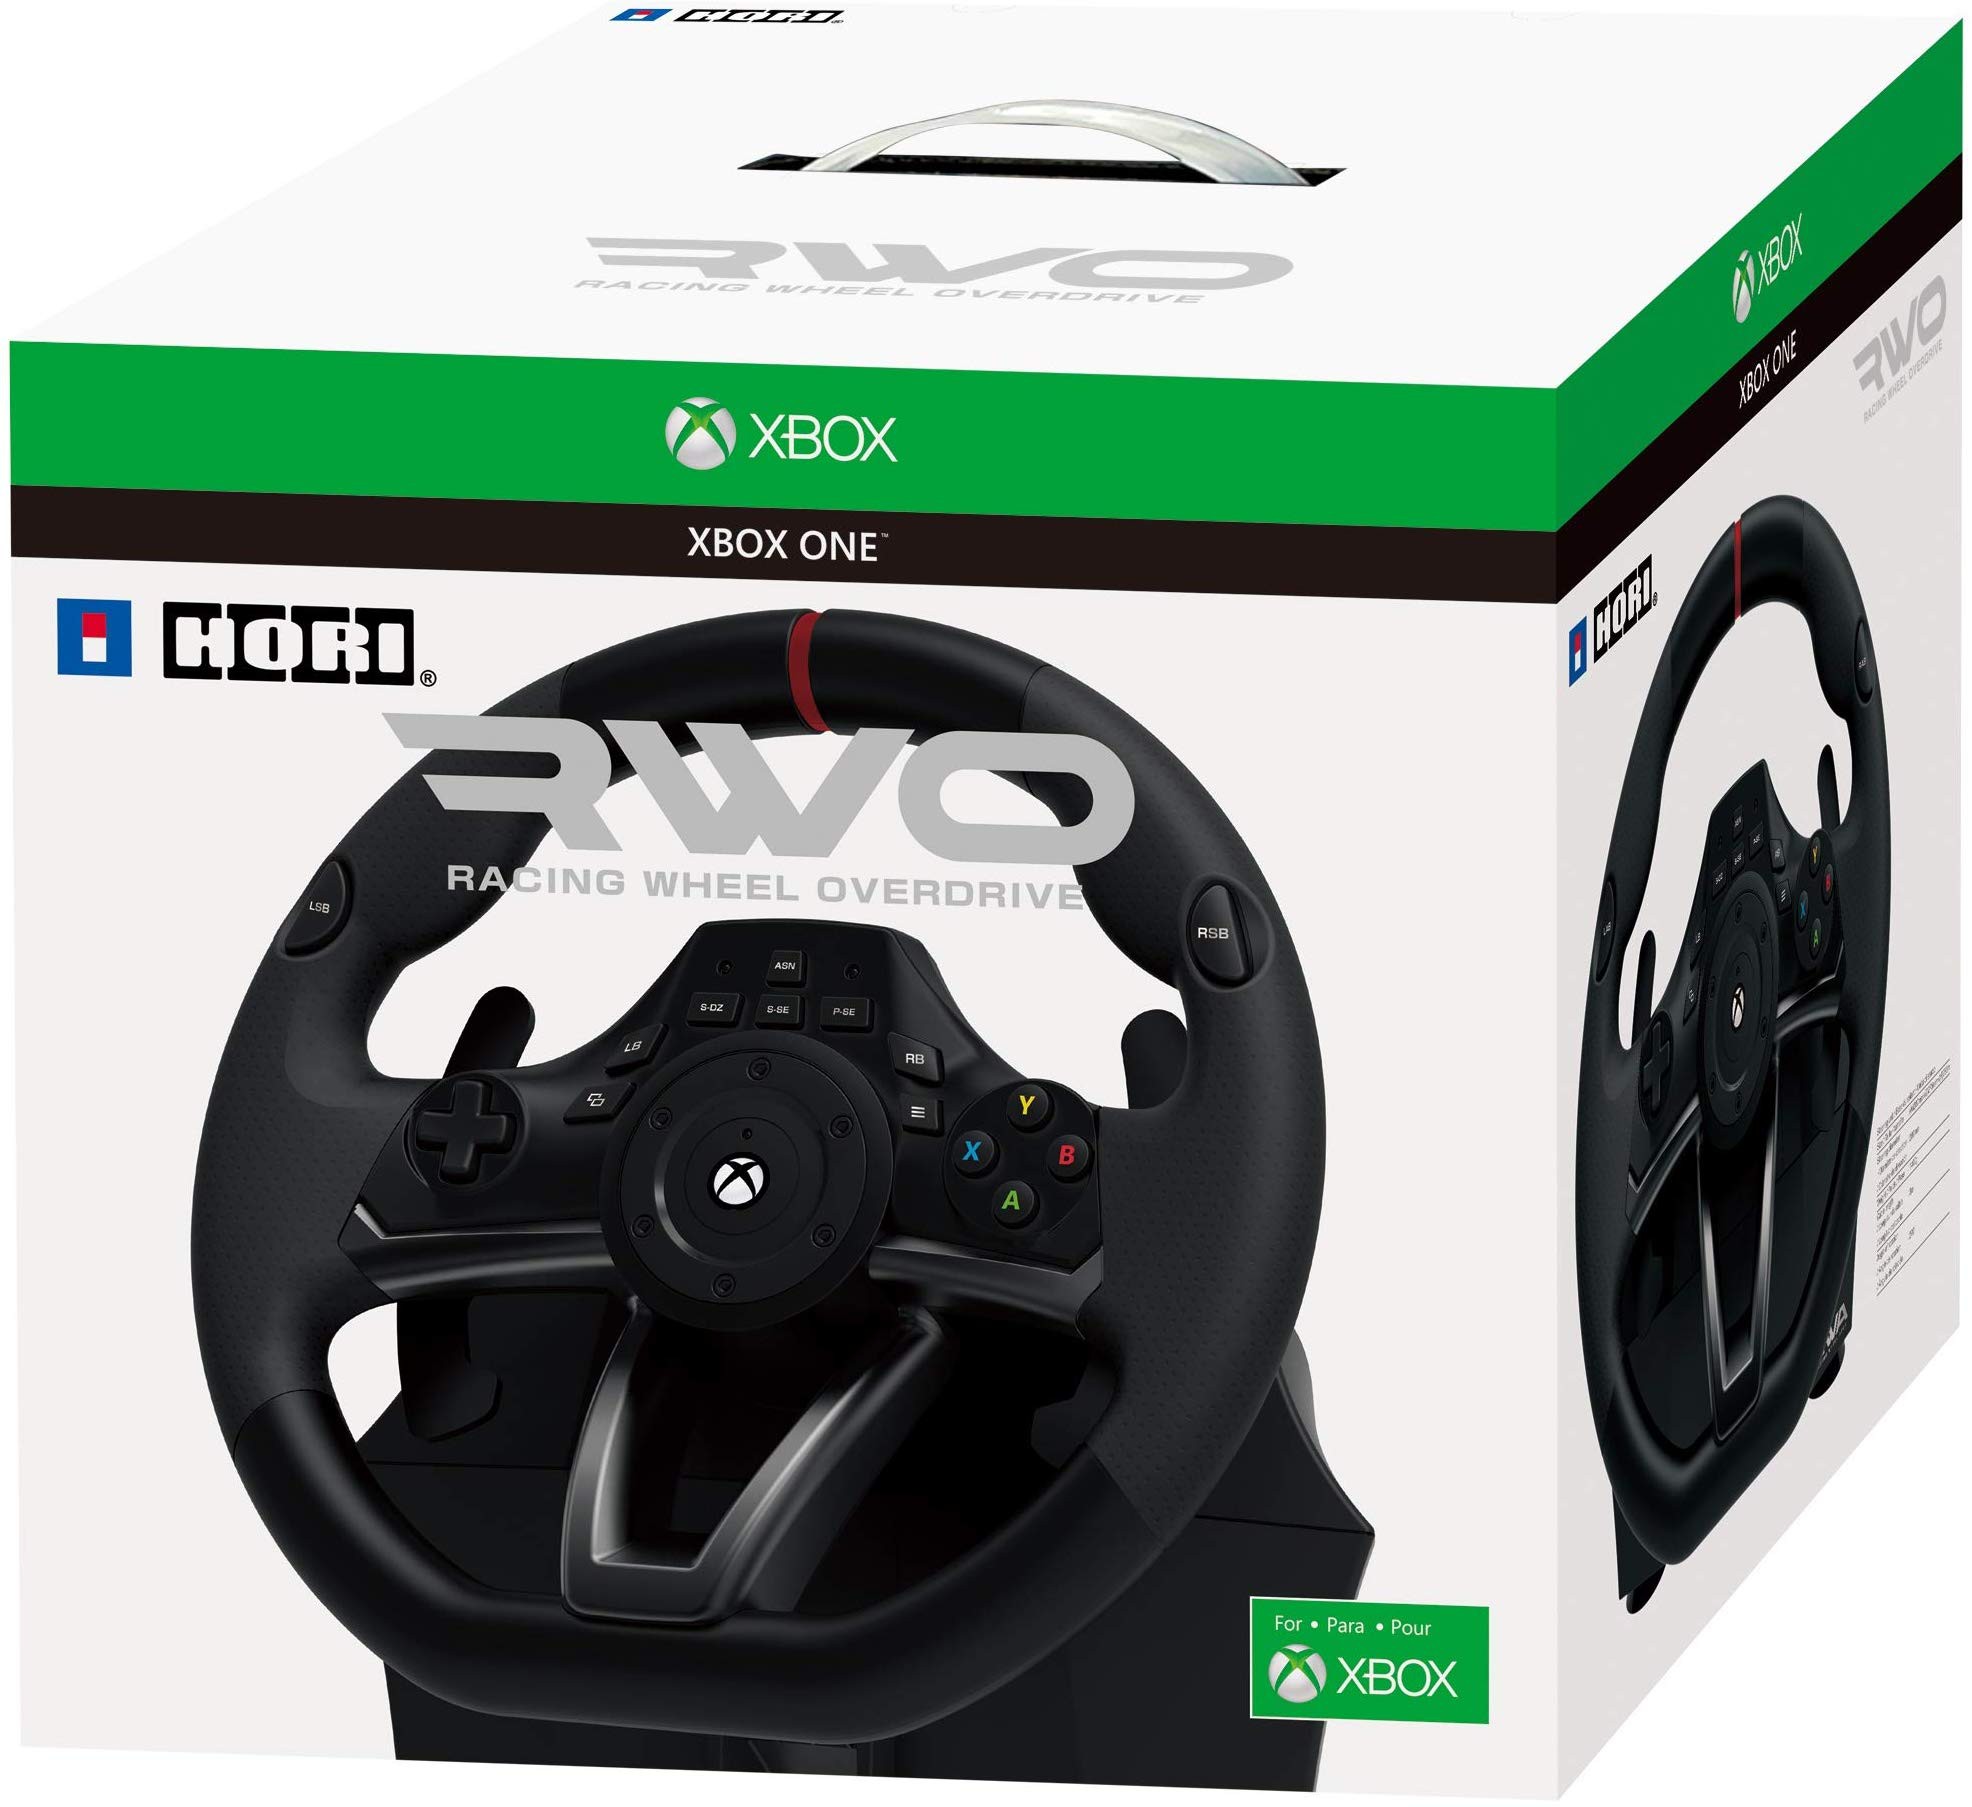 RWO Racing Wheel Overdrive controller Licensed by Microsoft| Xbox 360/Xbox One/PC